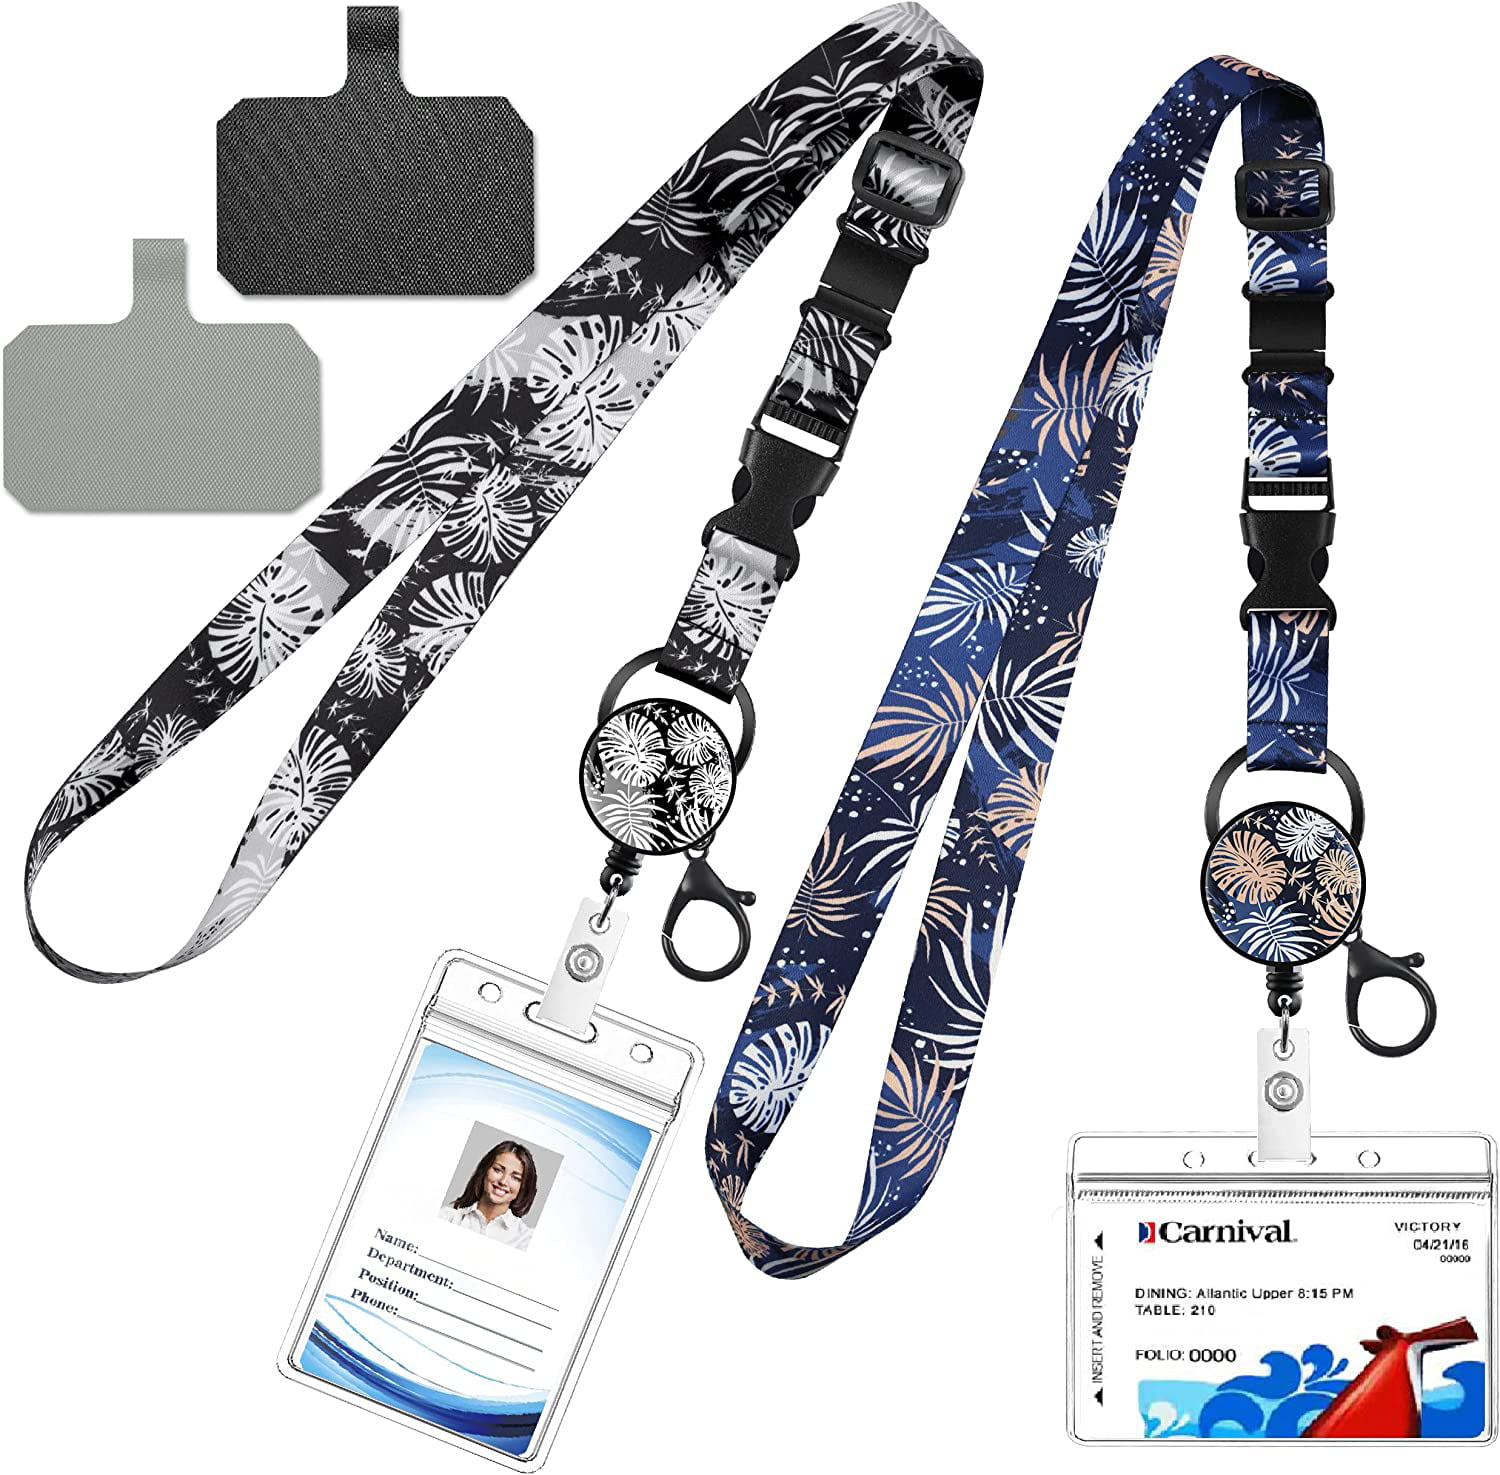 Htooq 5 Sets Lanyard With Id Holder Lanyards With Retractable Badge Reel Holder Id Holder Vertical Cruise Retractable Lanyard For Id Badges With Clip